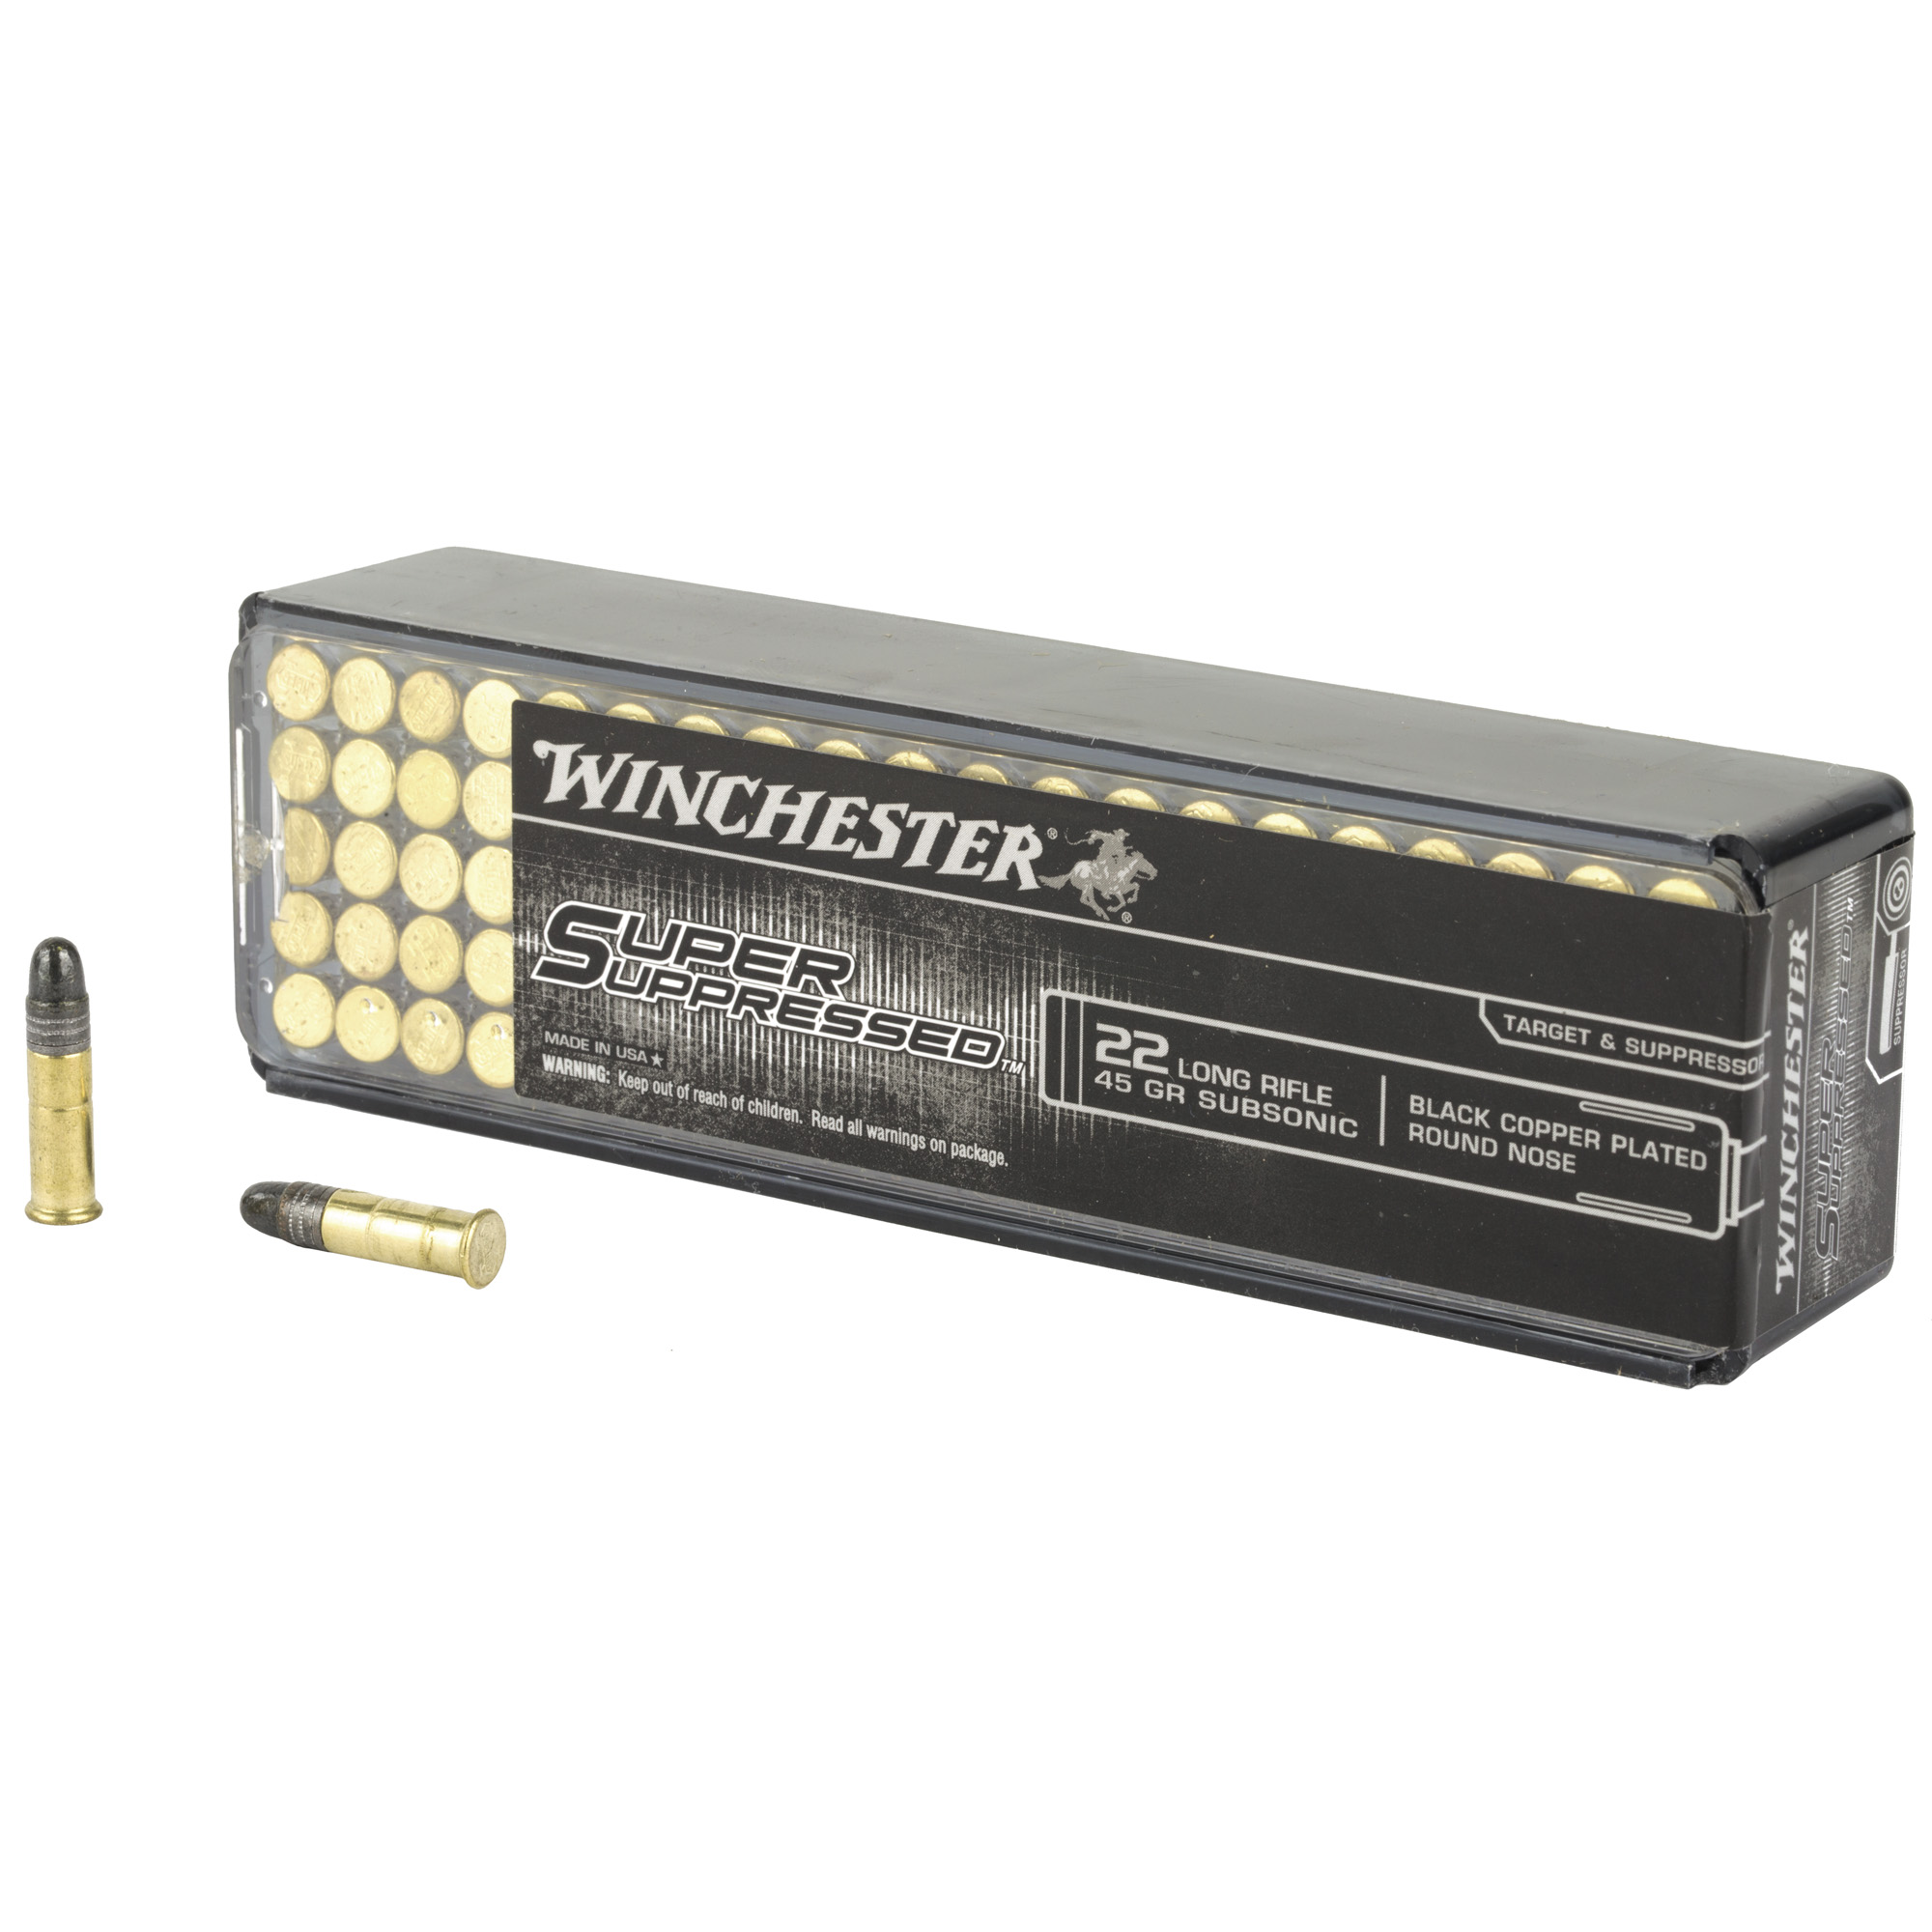 Winchester Ammo SUP22LR Super Suppressed 22 LR 45 gr Black Copper Plated Round Nose 100 RD